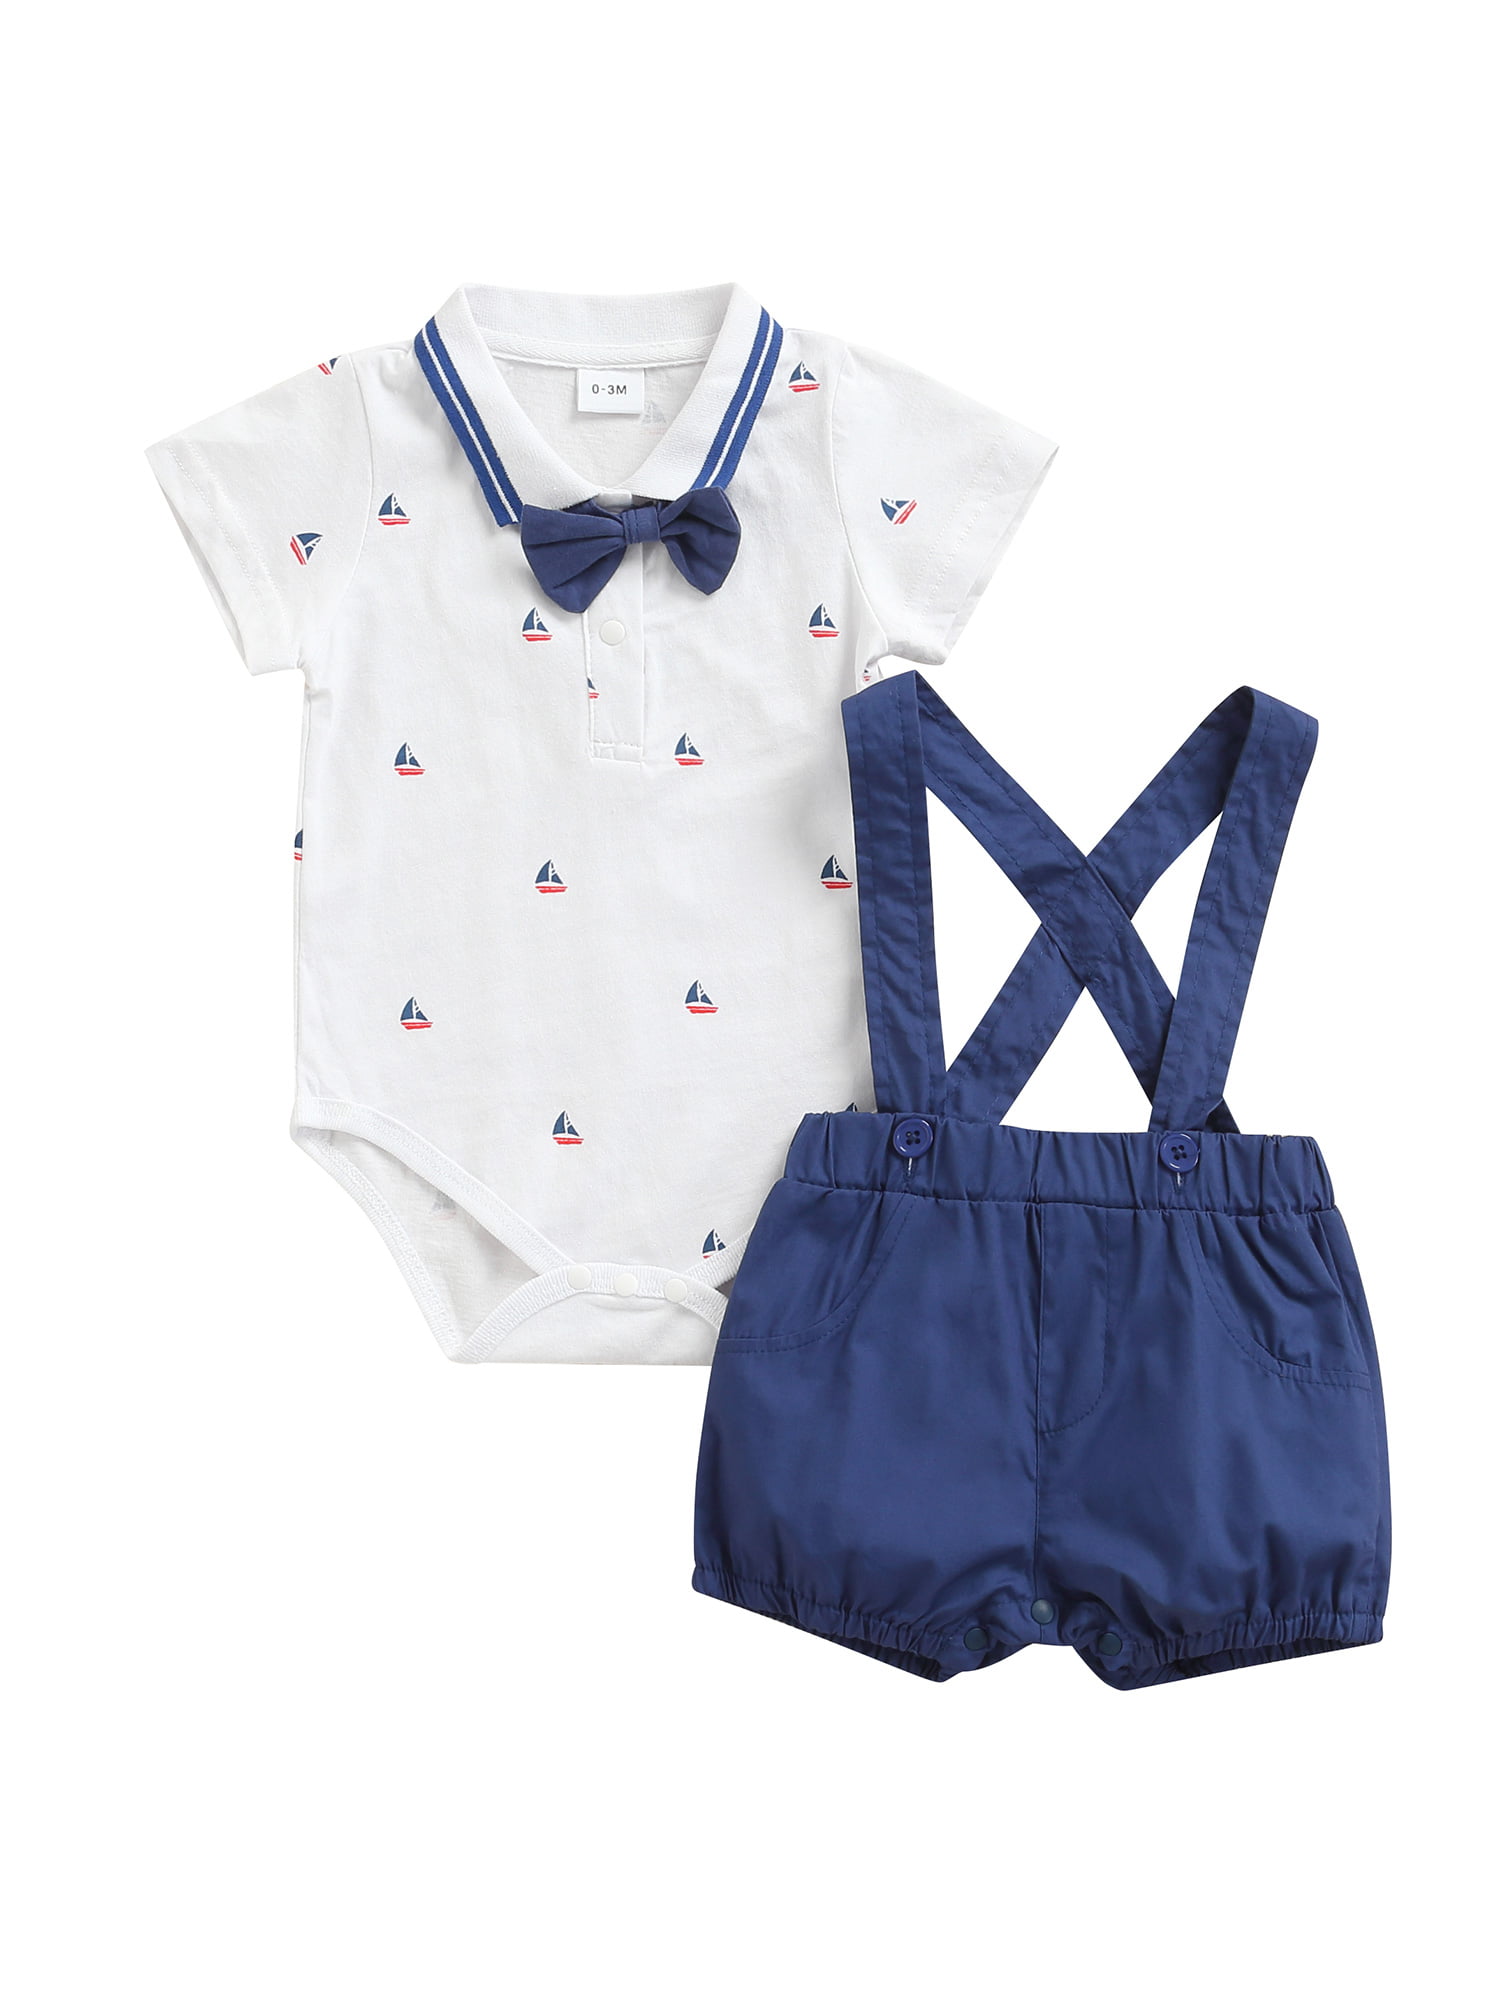 2pc Infant Baby Kid Boys Gentleman Bow Tie Romper+Shorts Overalls Outfit Clothes 